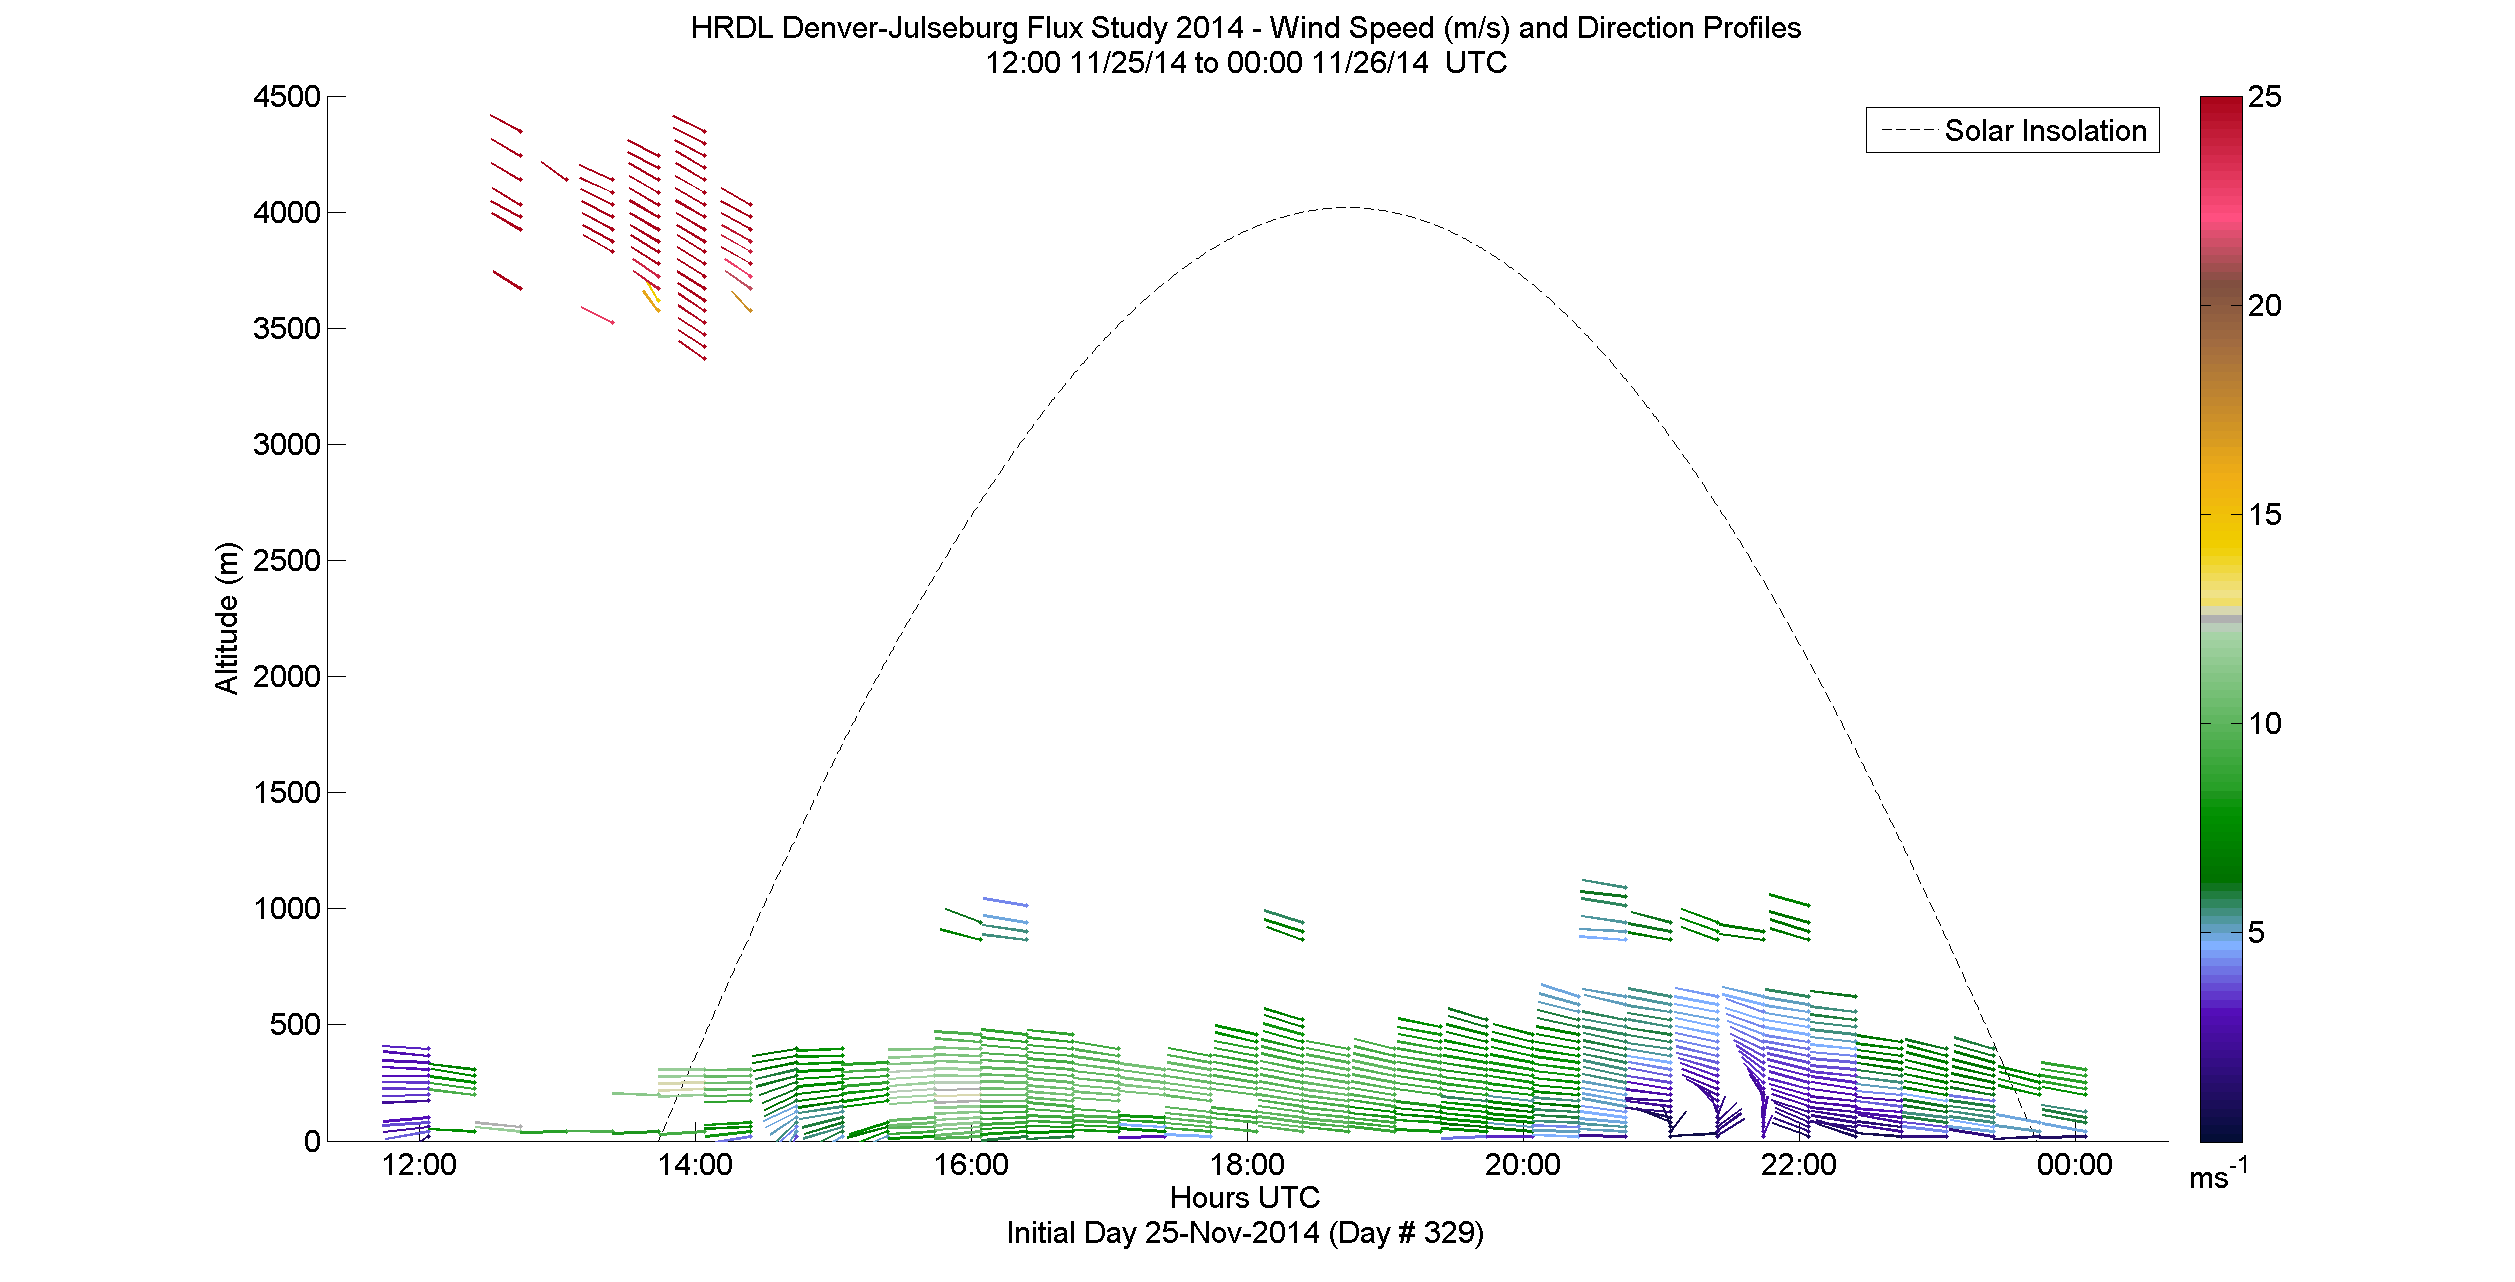 HRDL speed and direction profile - November 25 pm